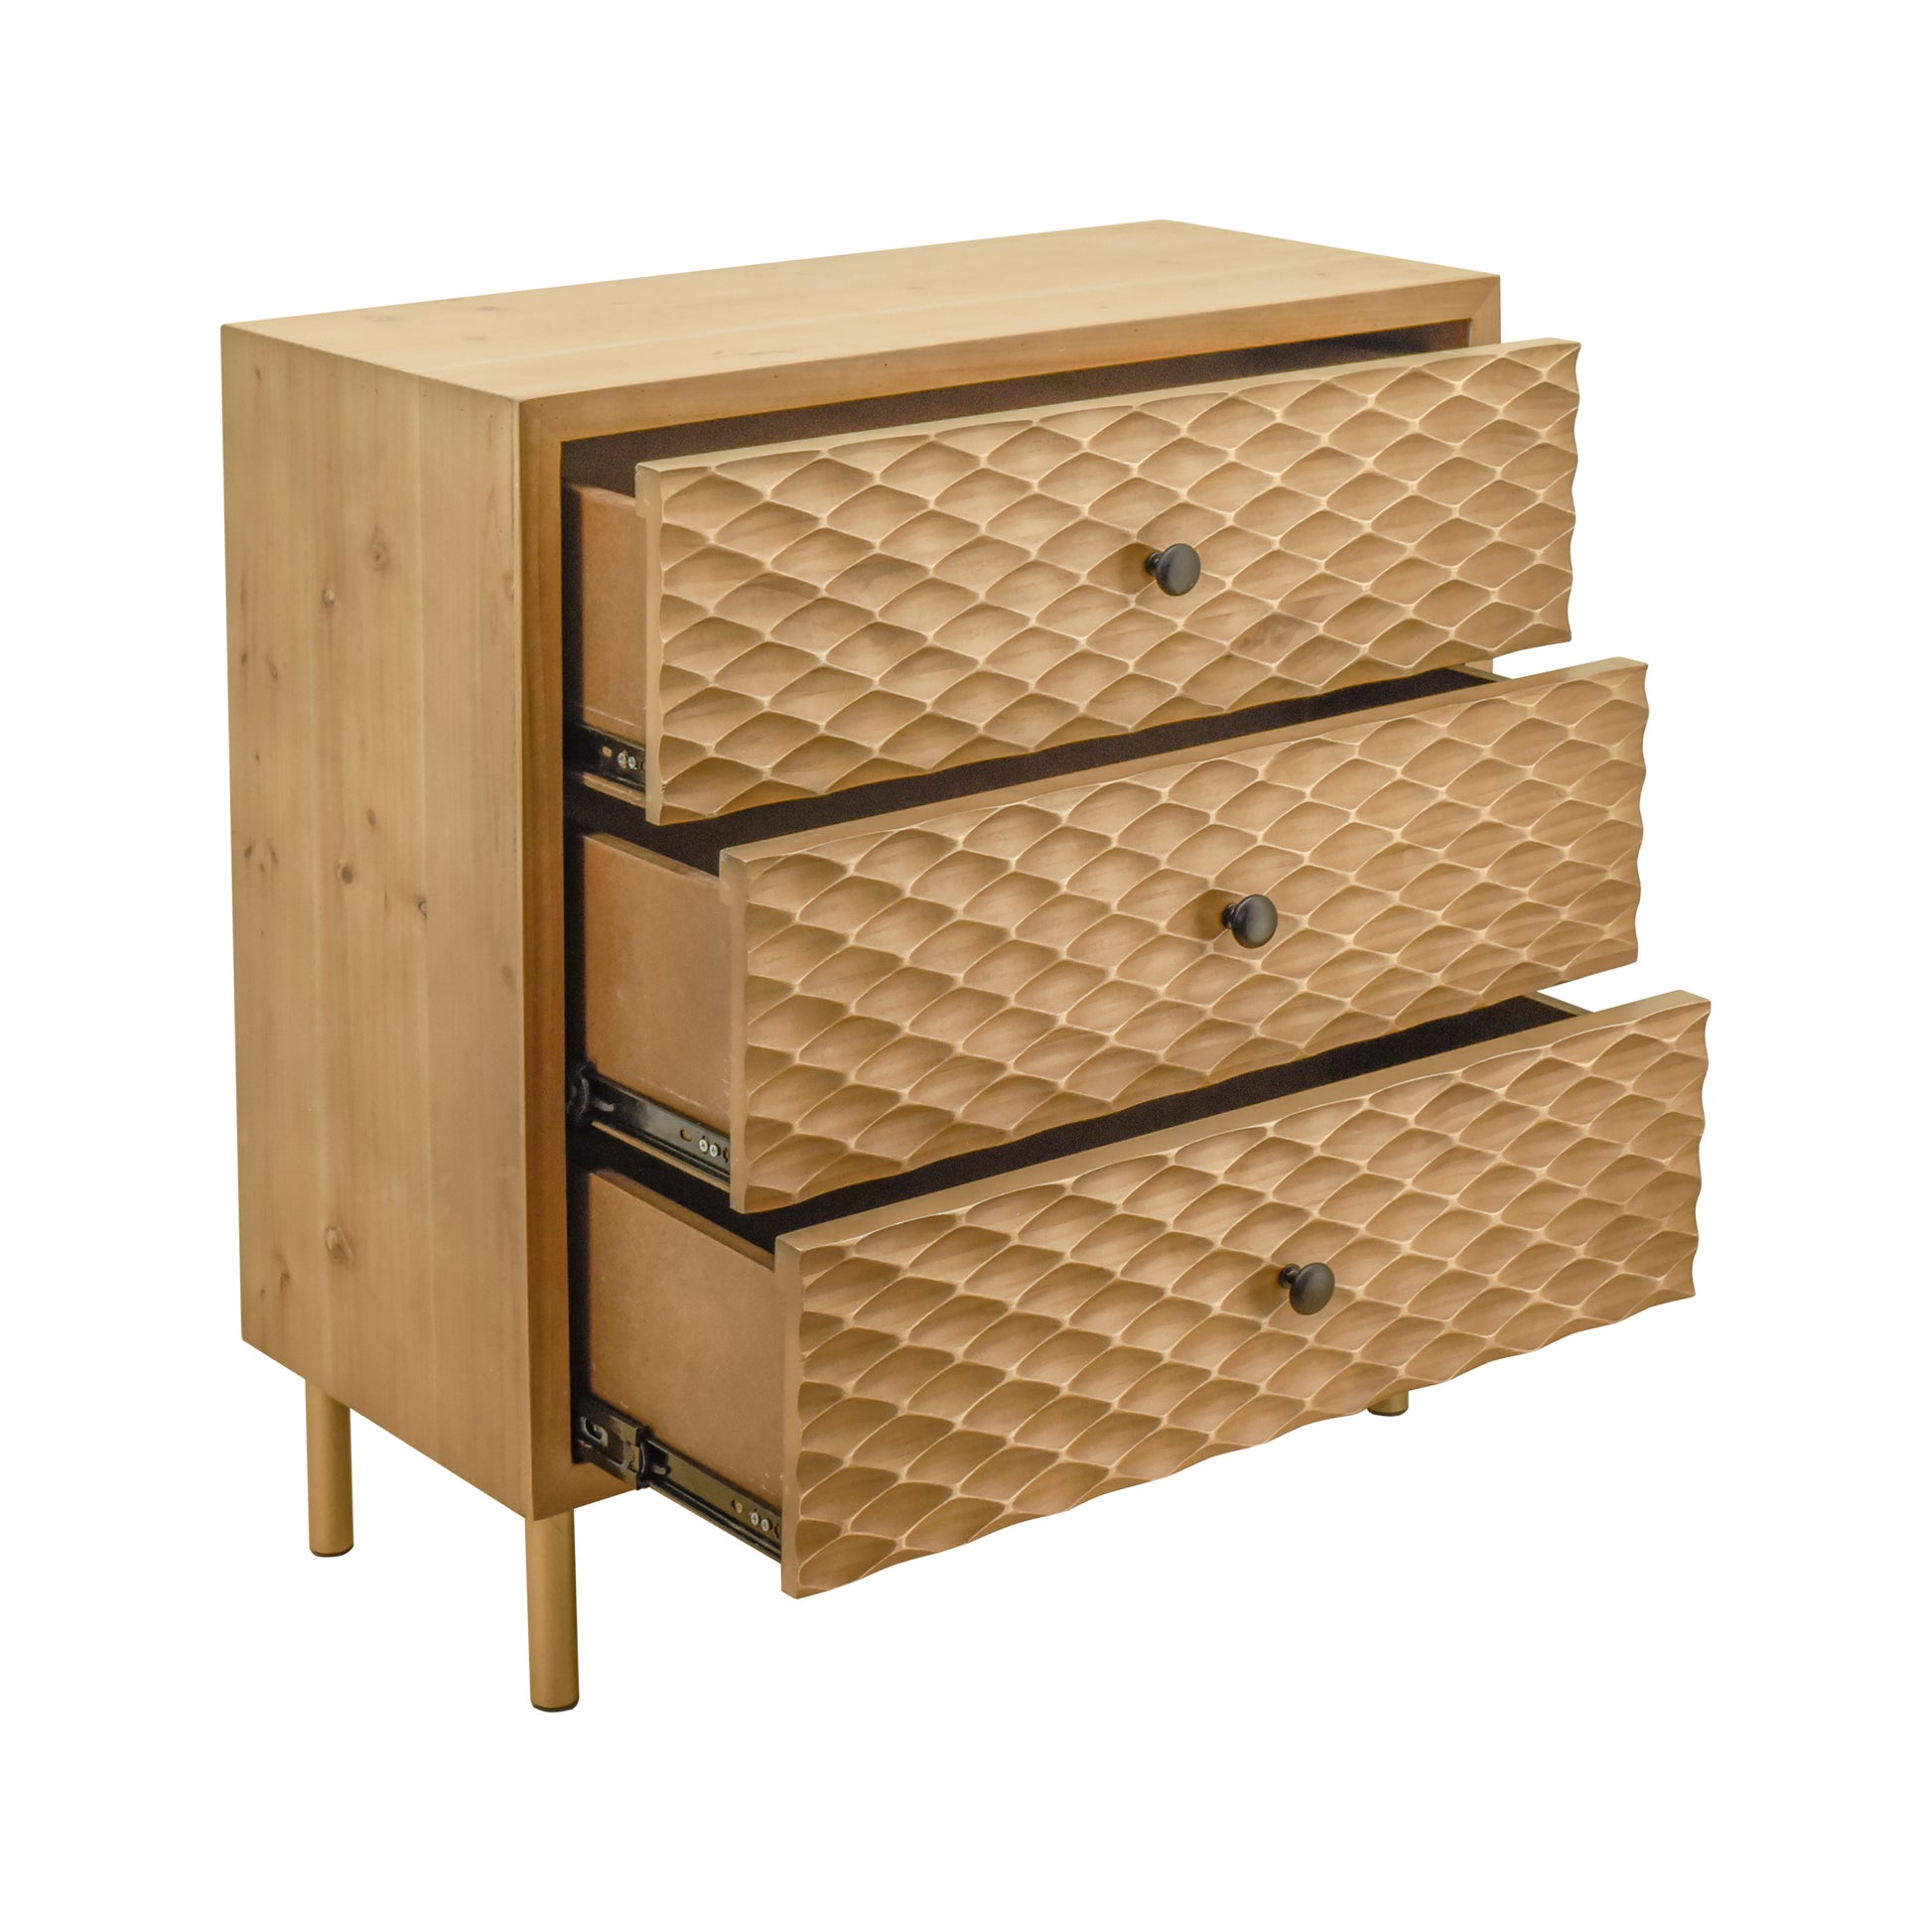 Wooden Accent Storage Cabinet with 3 Drawers, Bachelors Chest for Bedroom, Living Room